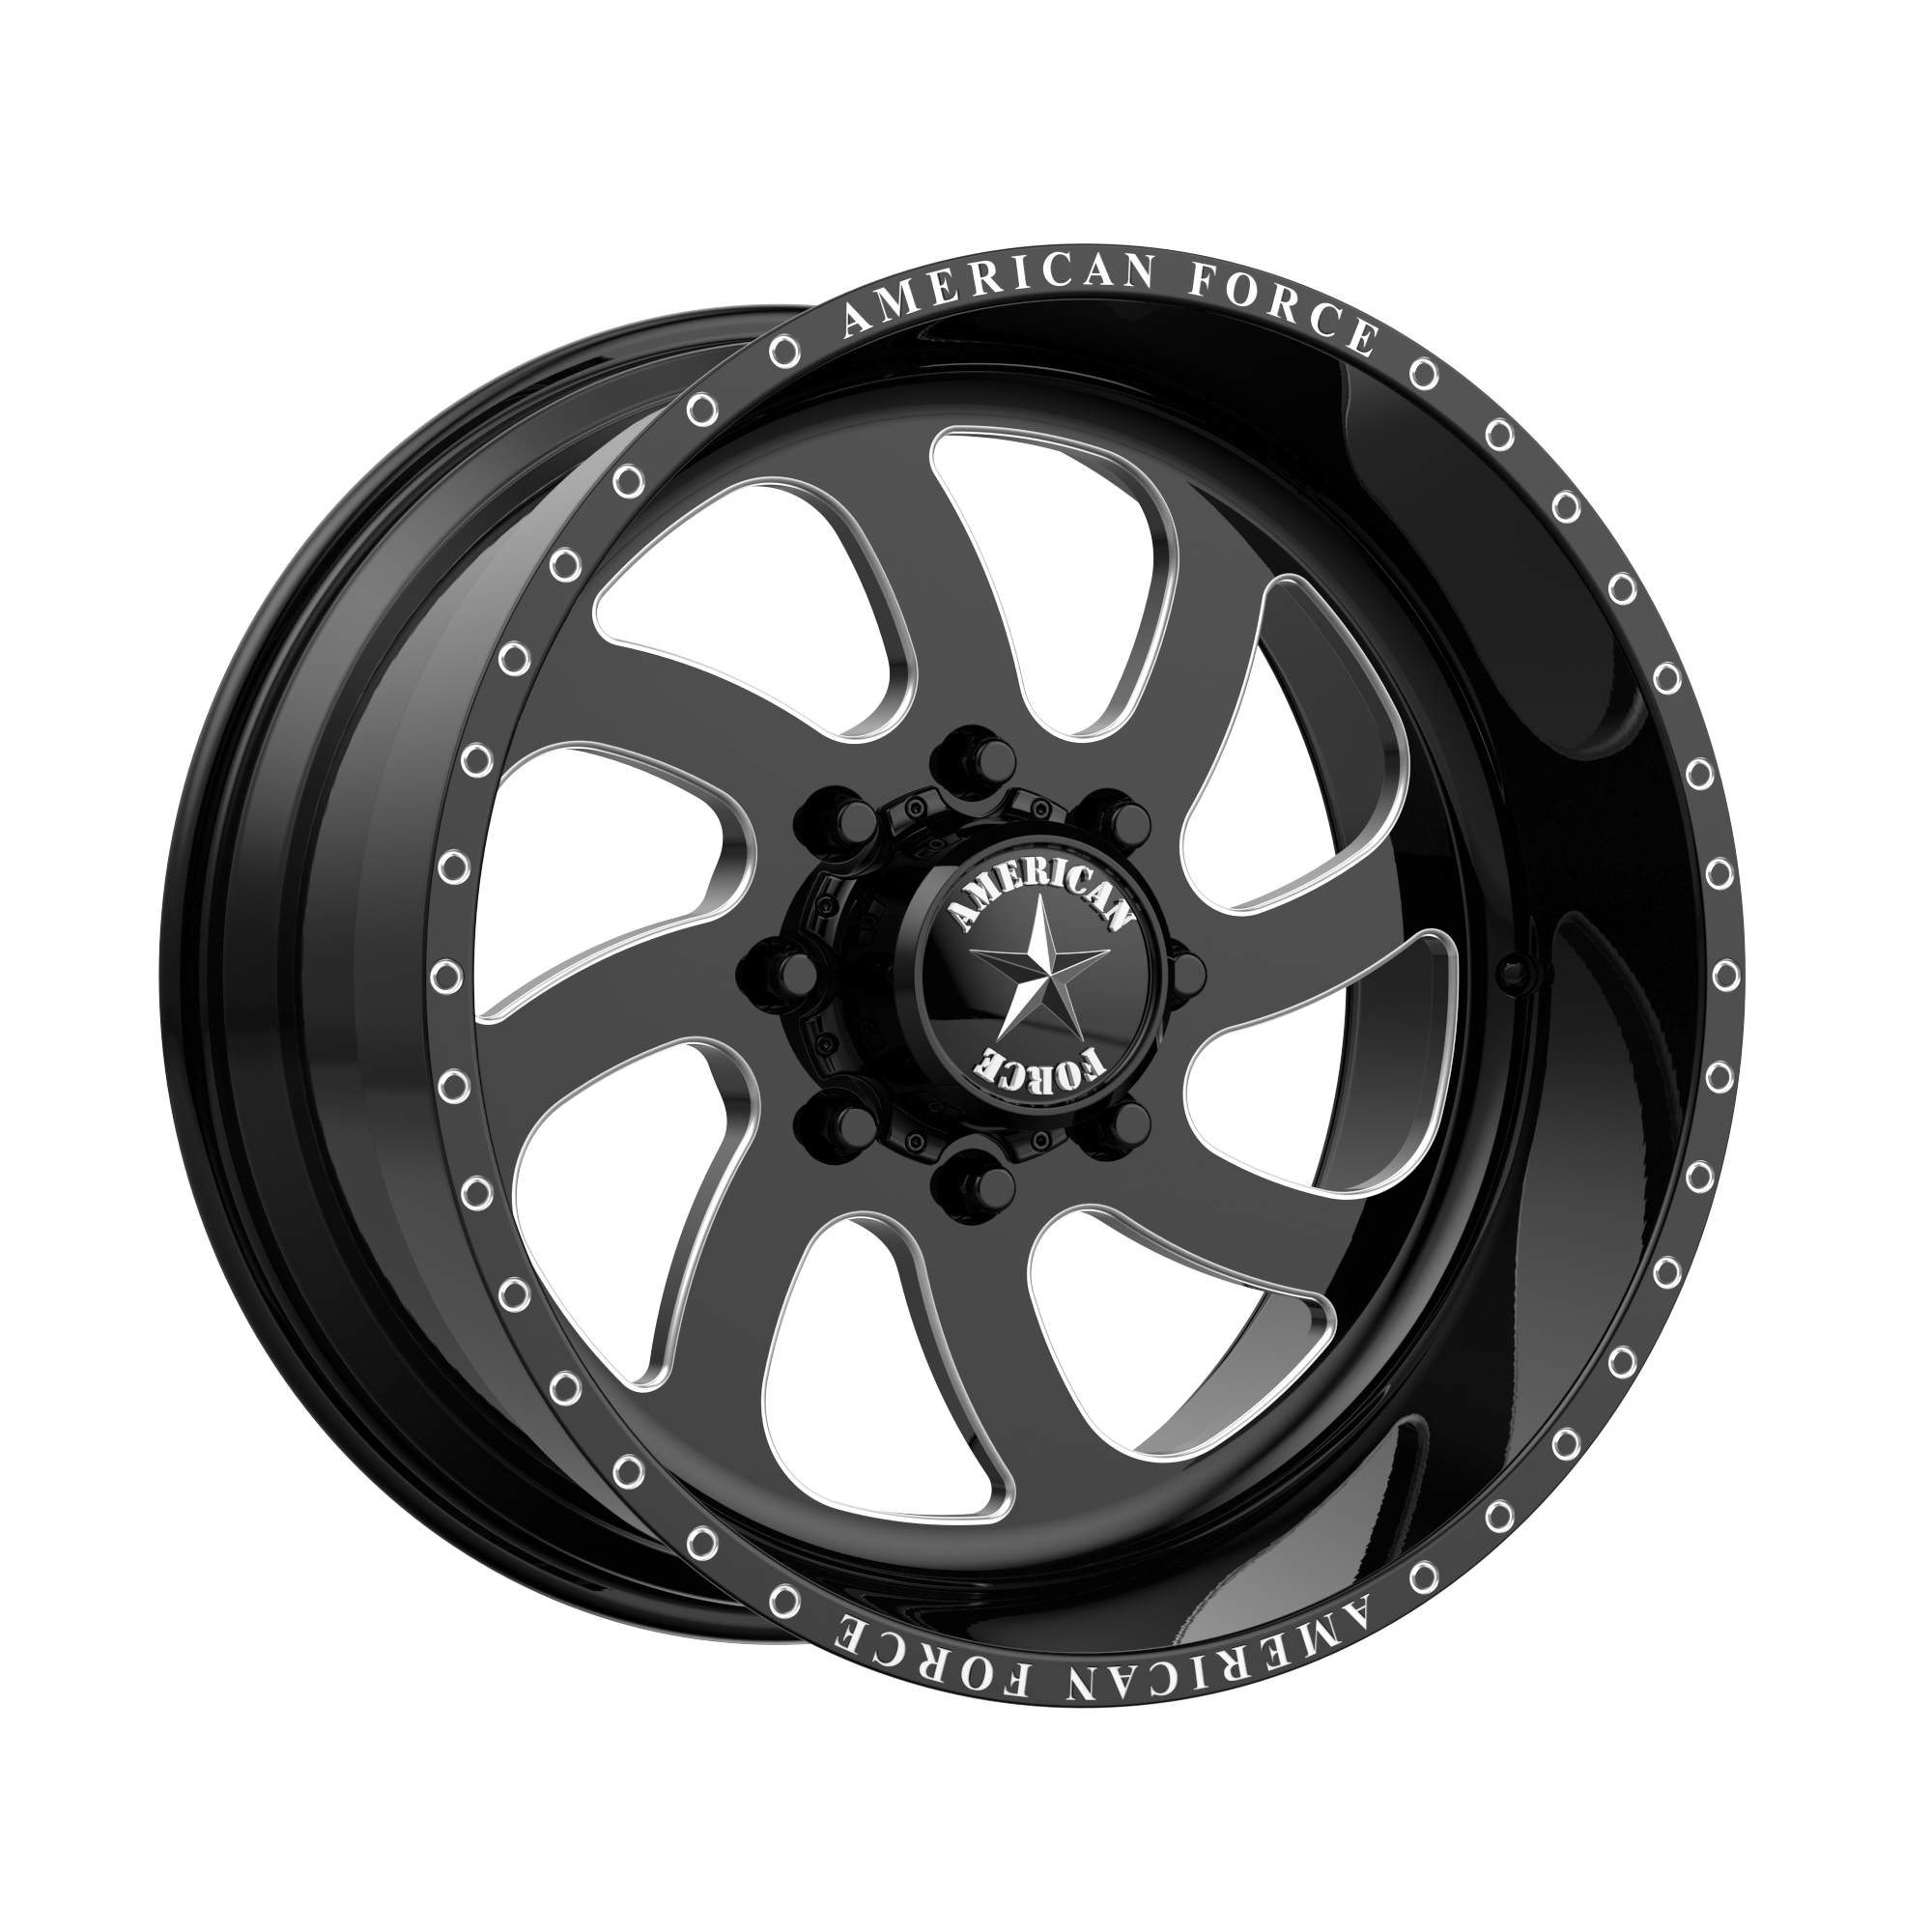 BLADE SS 20x10 8x170.00 GLOSS BLACK MACHINED (-25 mm) - Tires and Engine Performance